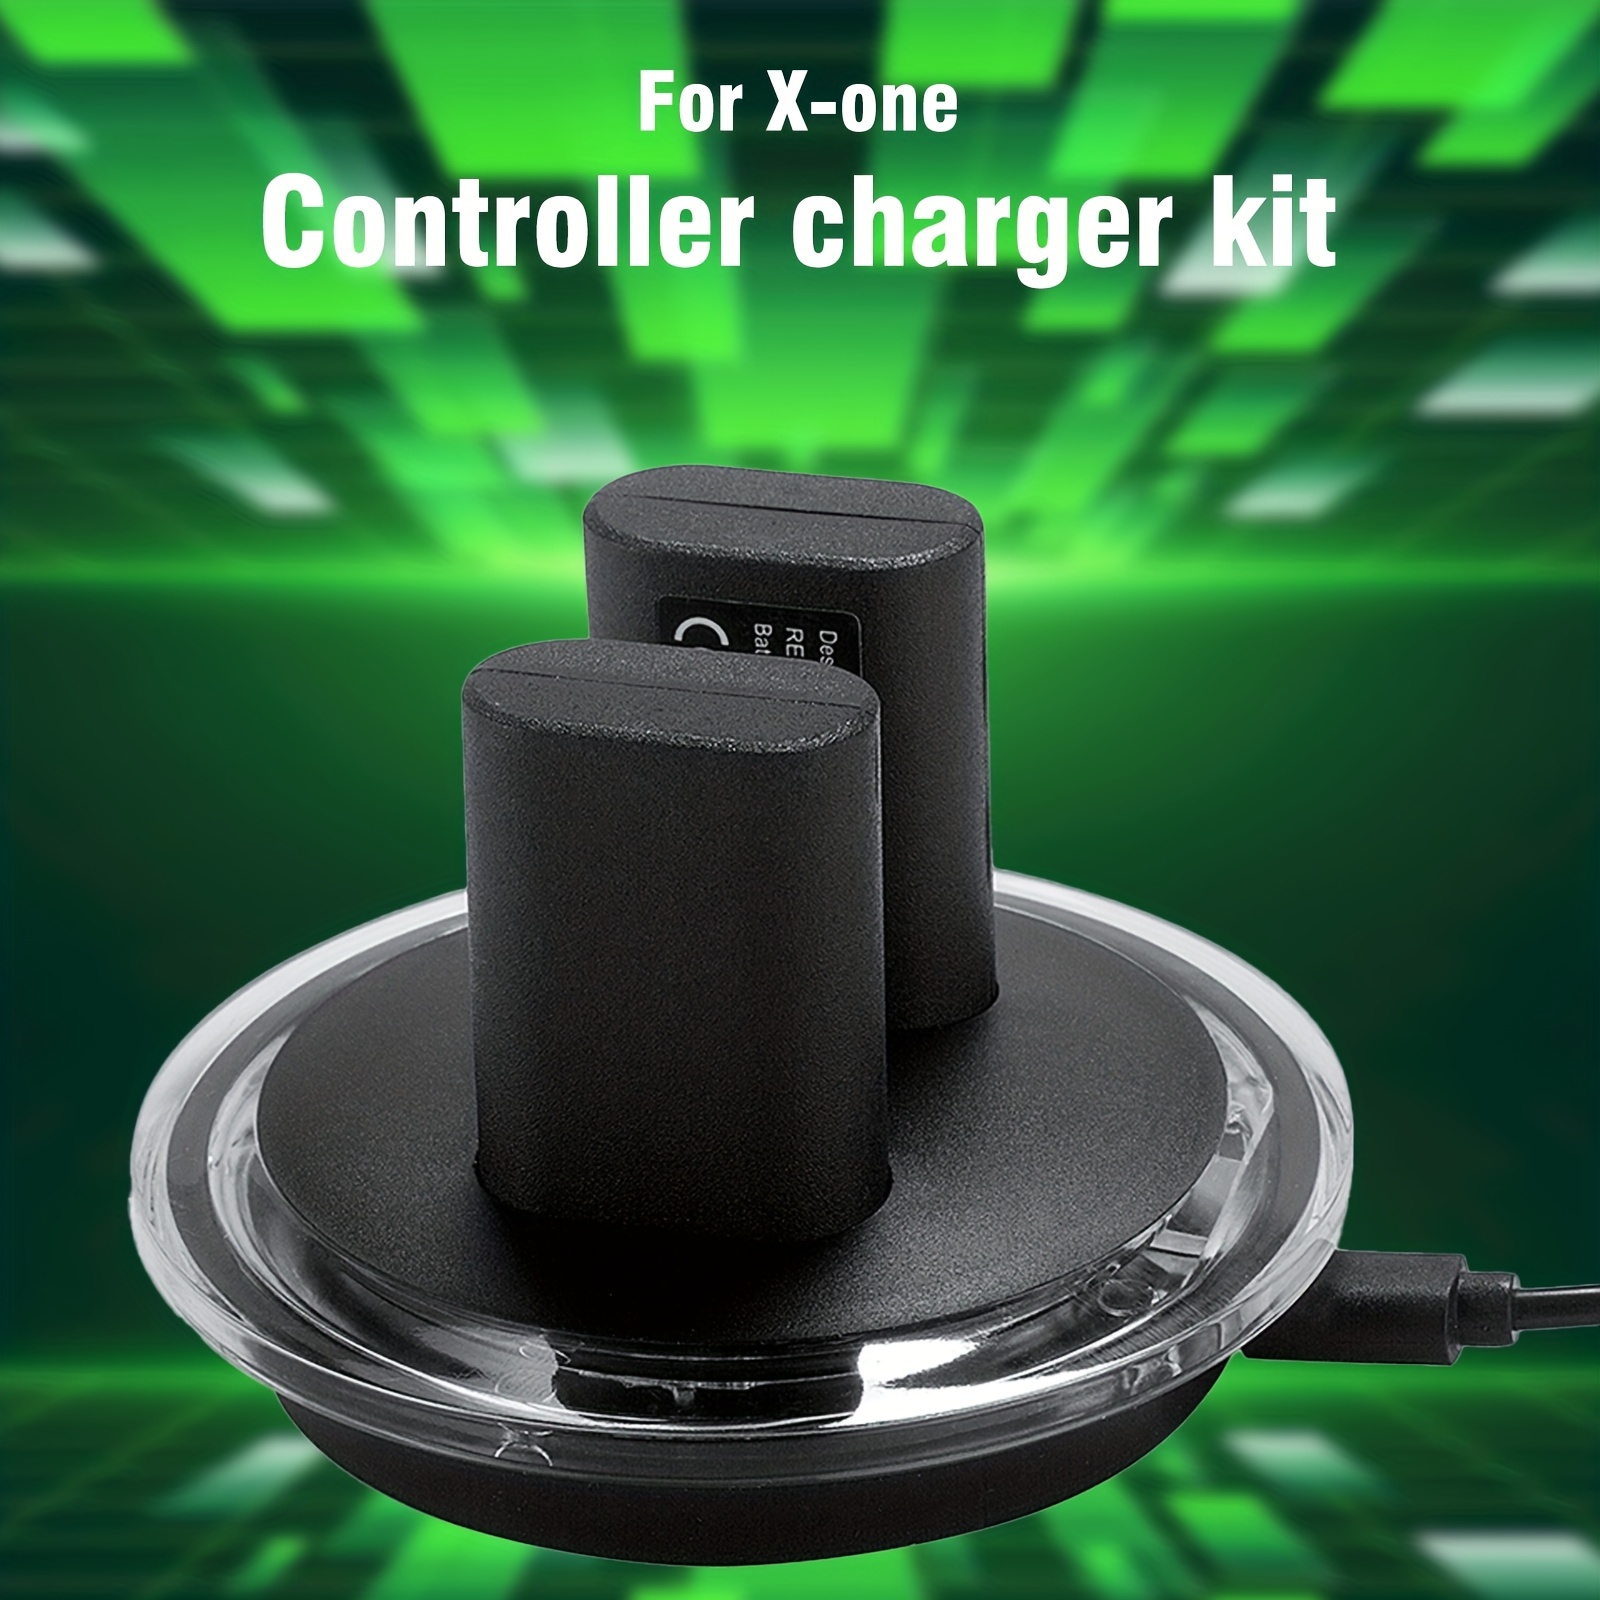 Xbox controller charger: How to charge Xbox Series X/S controllers